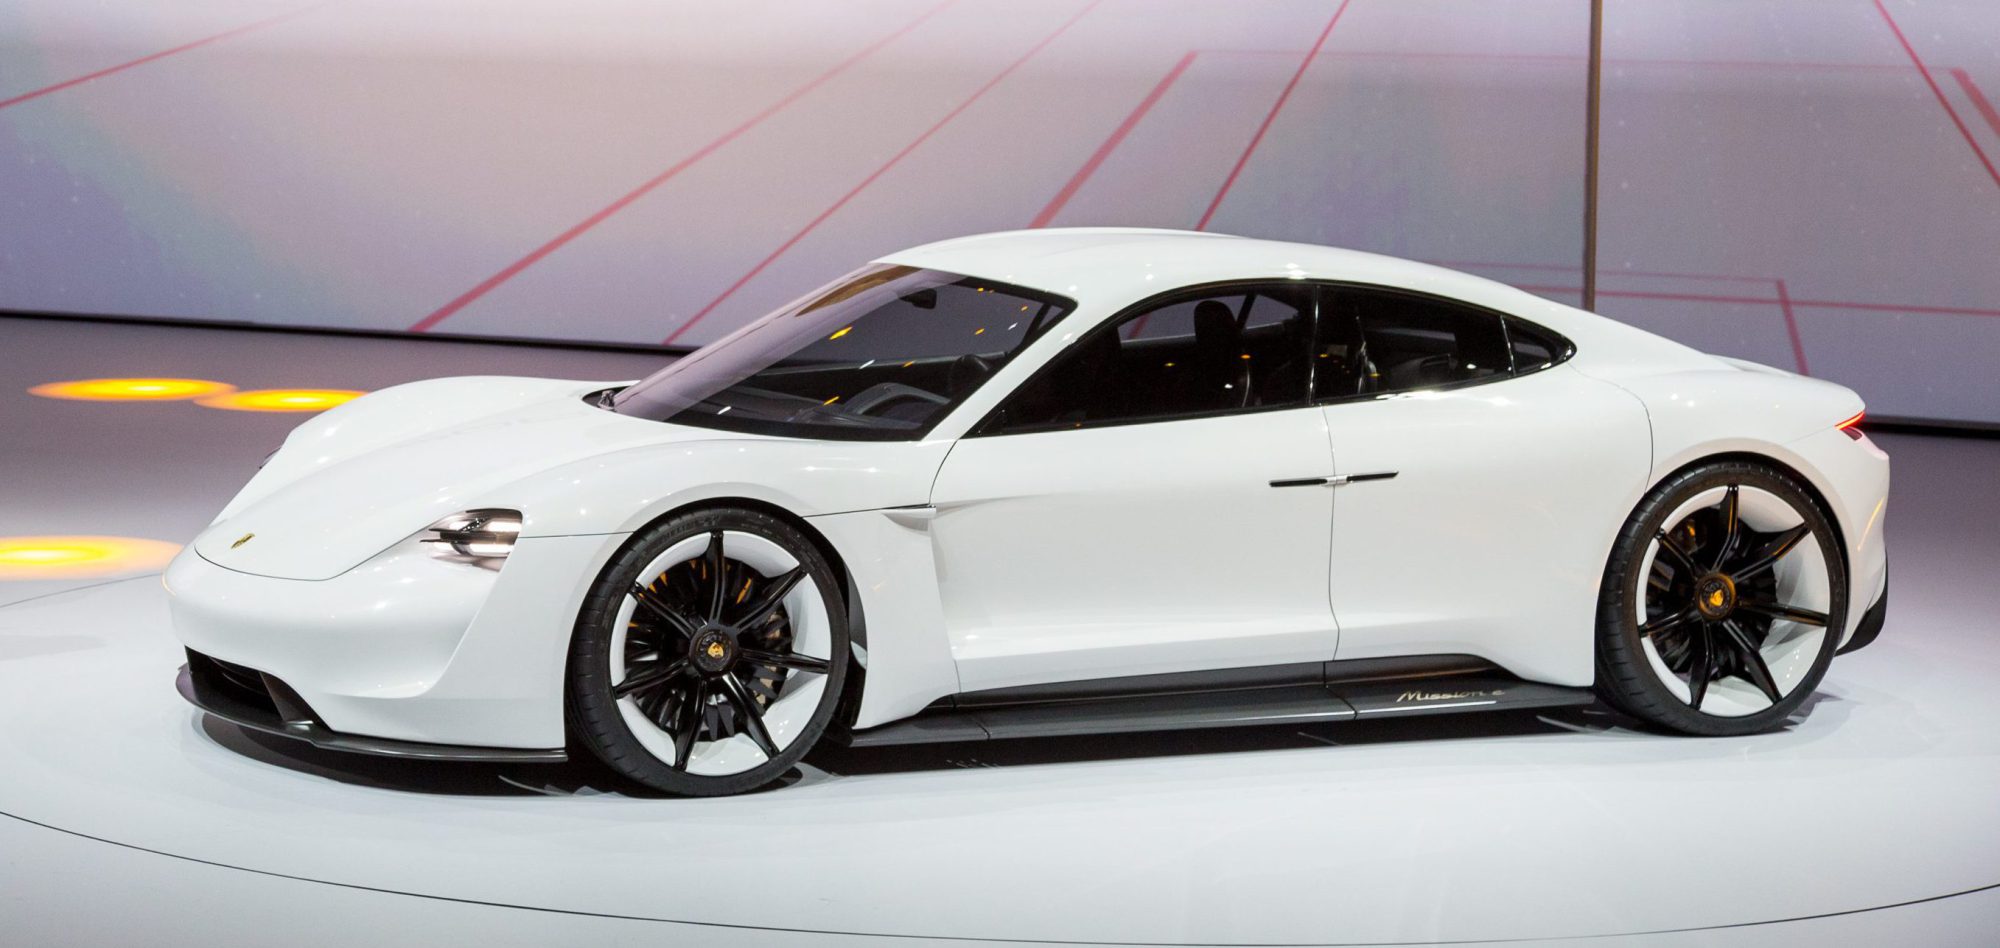 Porsche customers are hoping the production Mission E looks just like this prototype